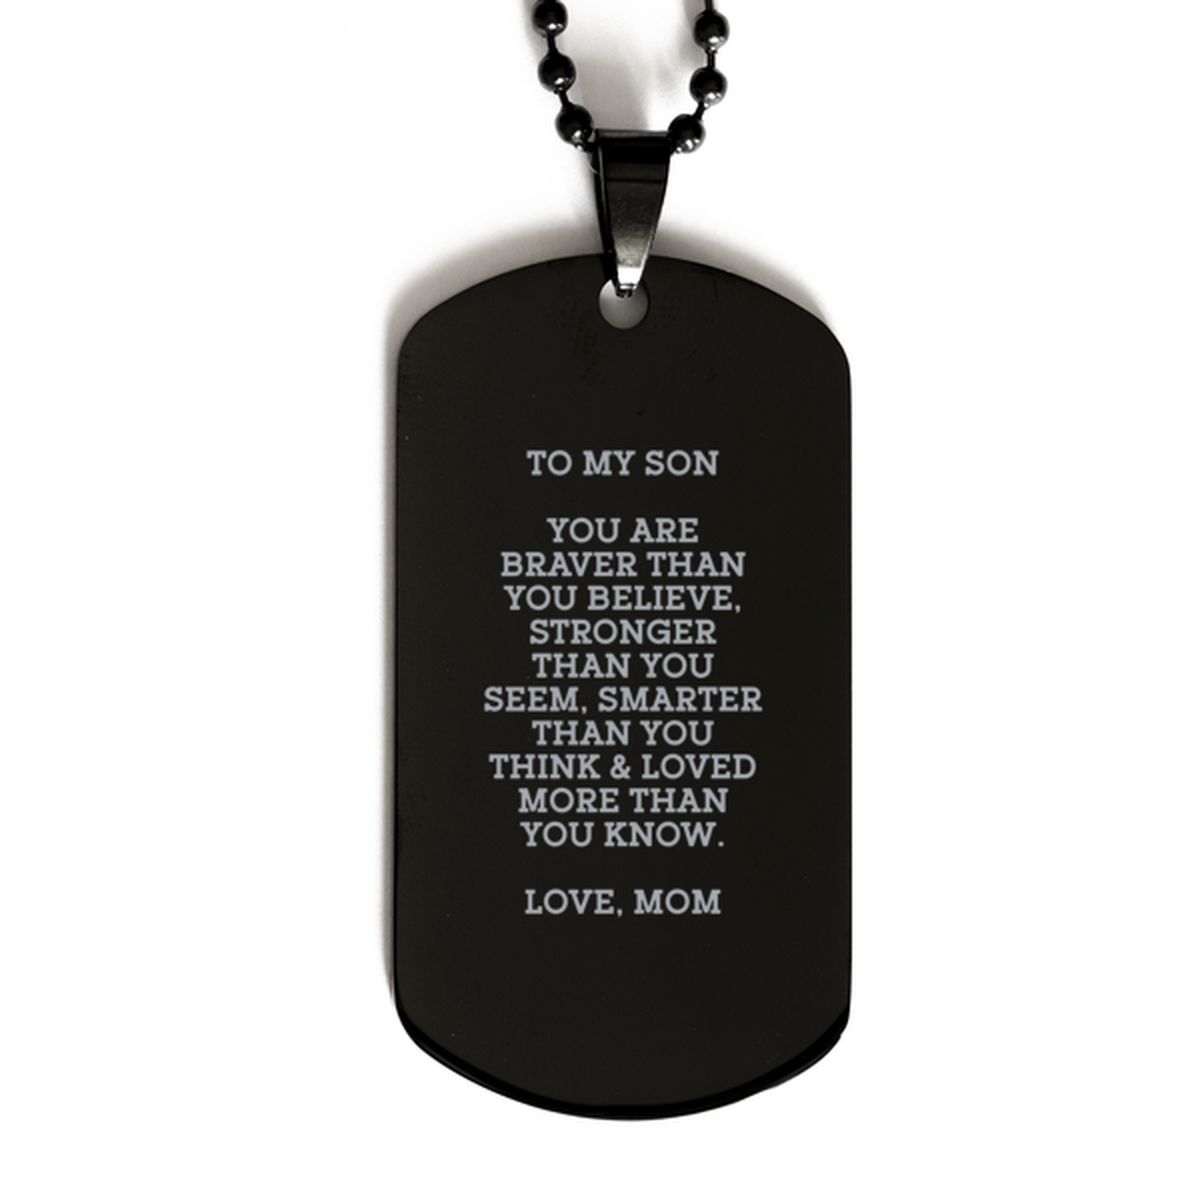 To My Son Black Dog Tag, You Are Braver Than You Believe, Graduation Day Gifts For Son From Mom, Birthday Gifts For Men